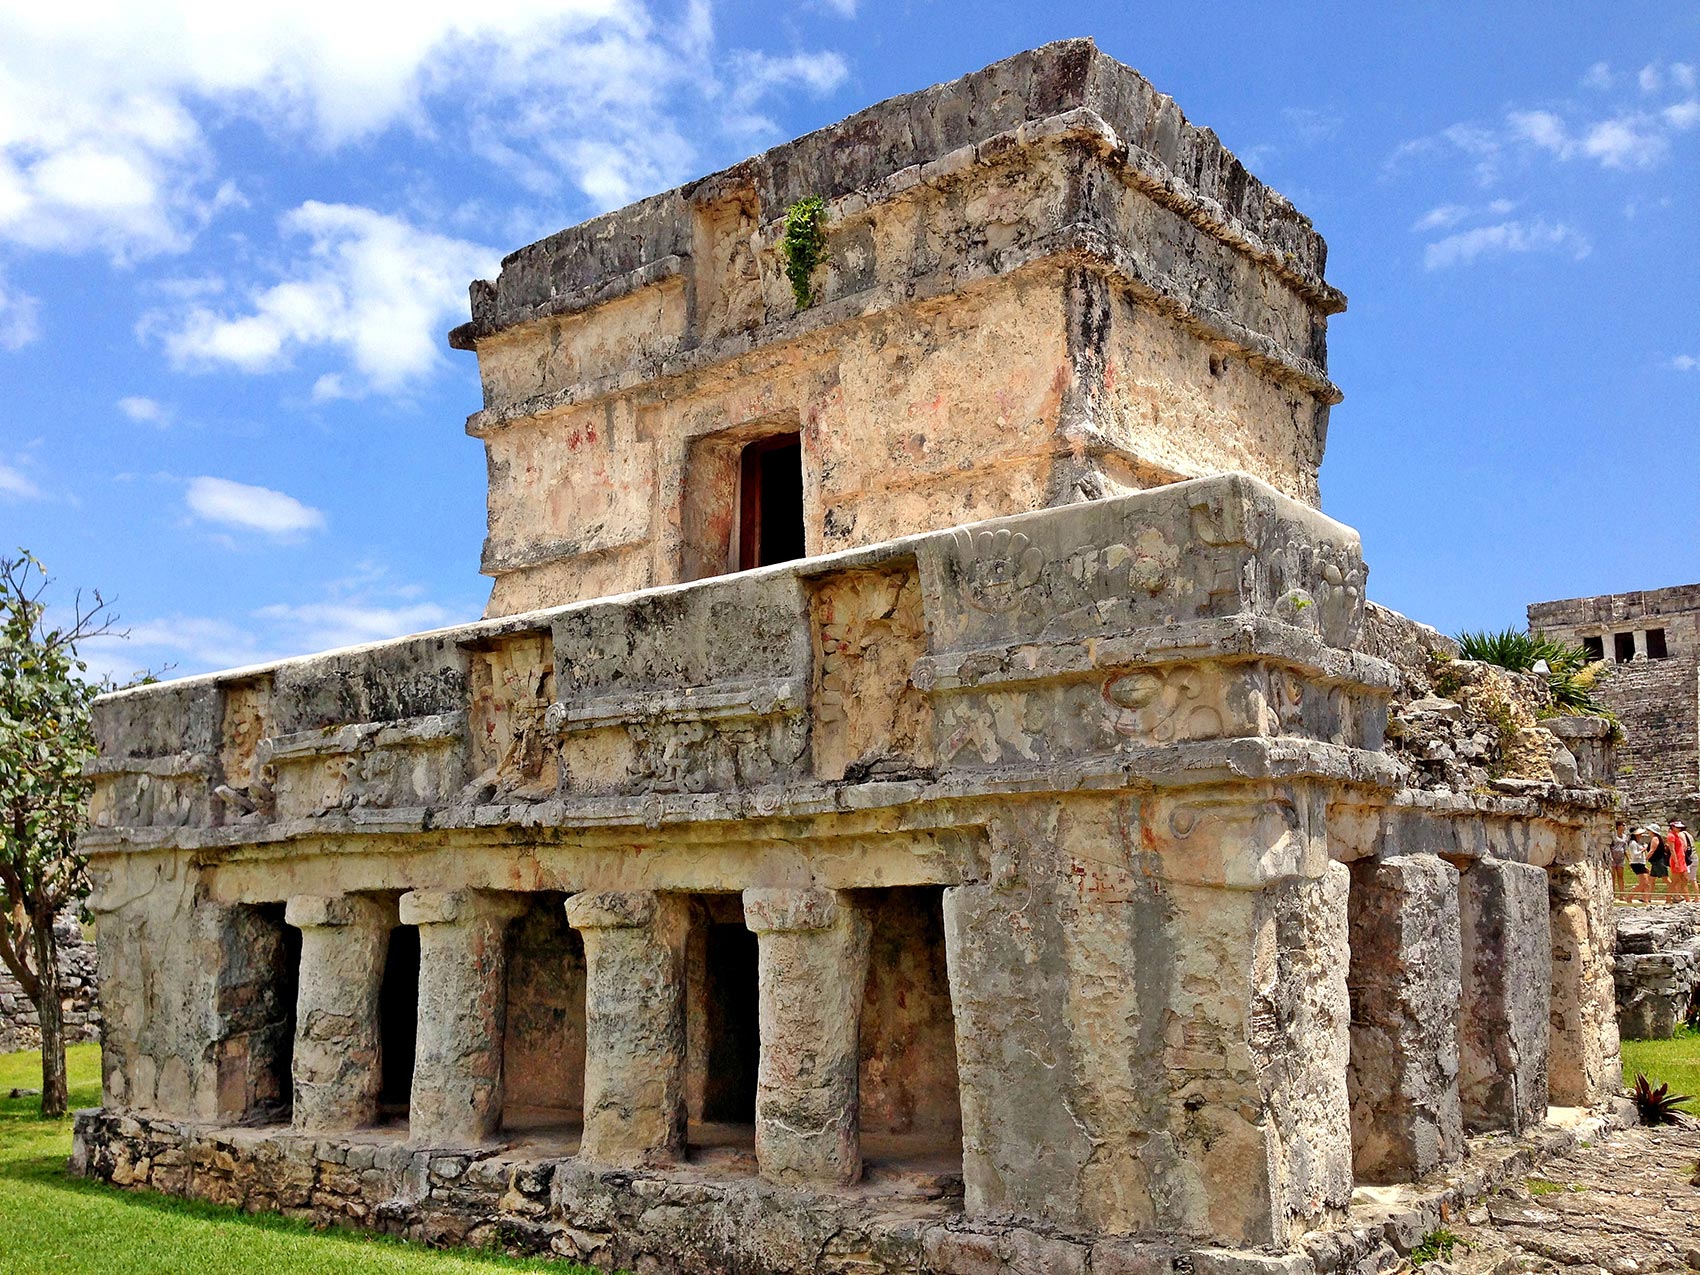 LDS Tour 5. Tulum Ruins and Xel-ha Natural Water Park